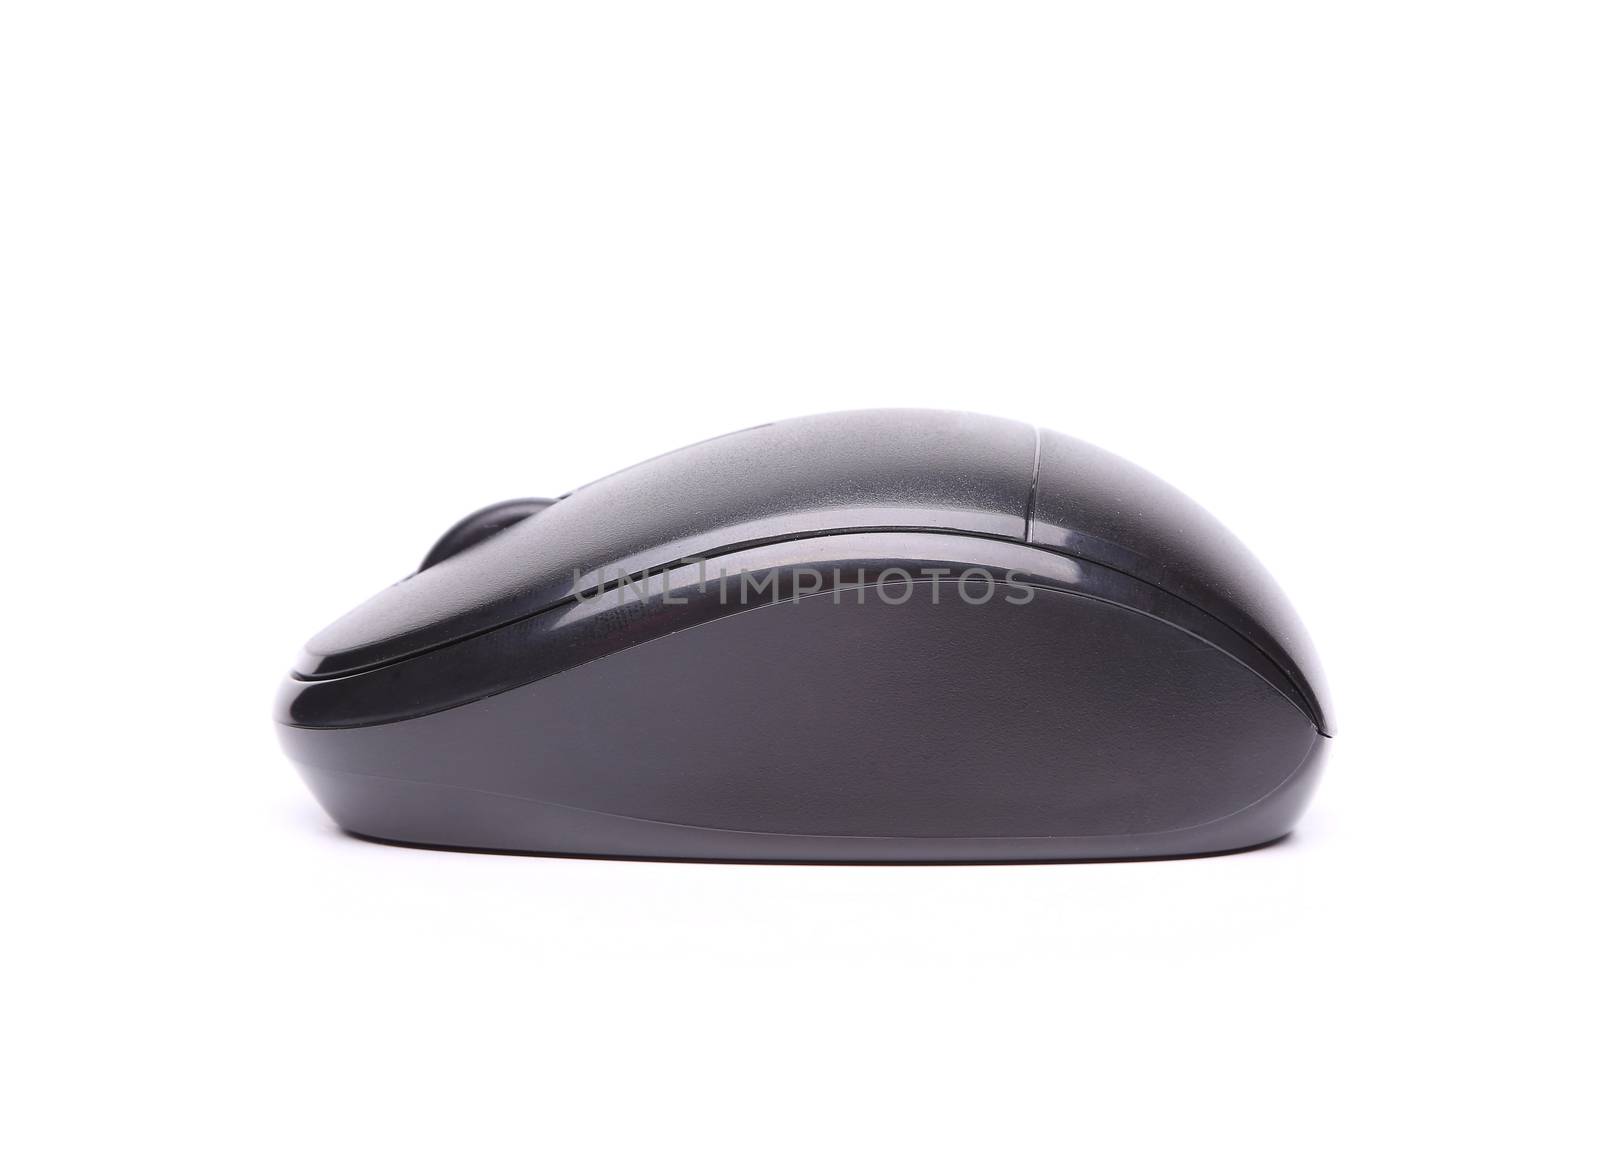 Wireless computer mouse isolated on white background flank